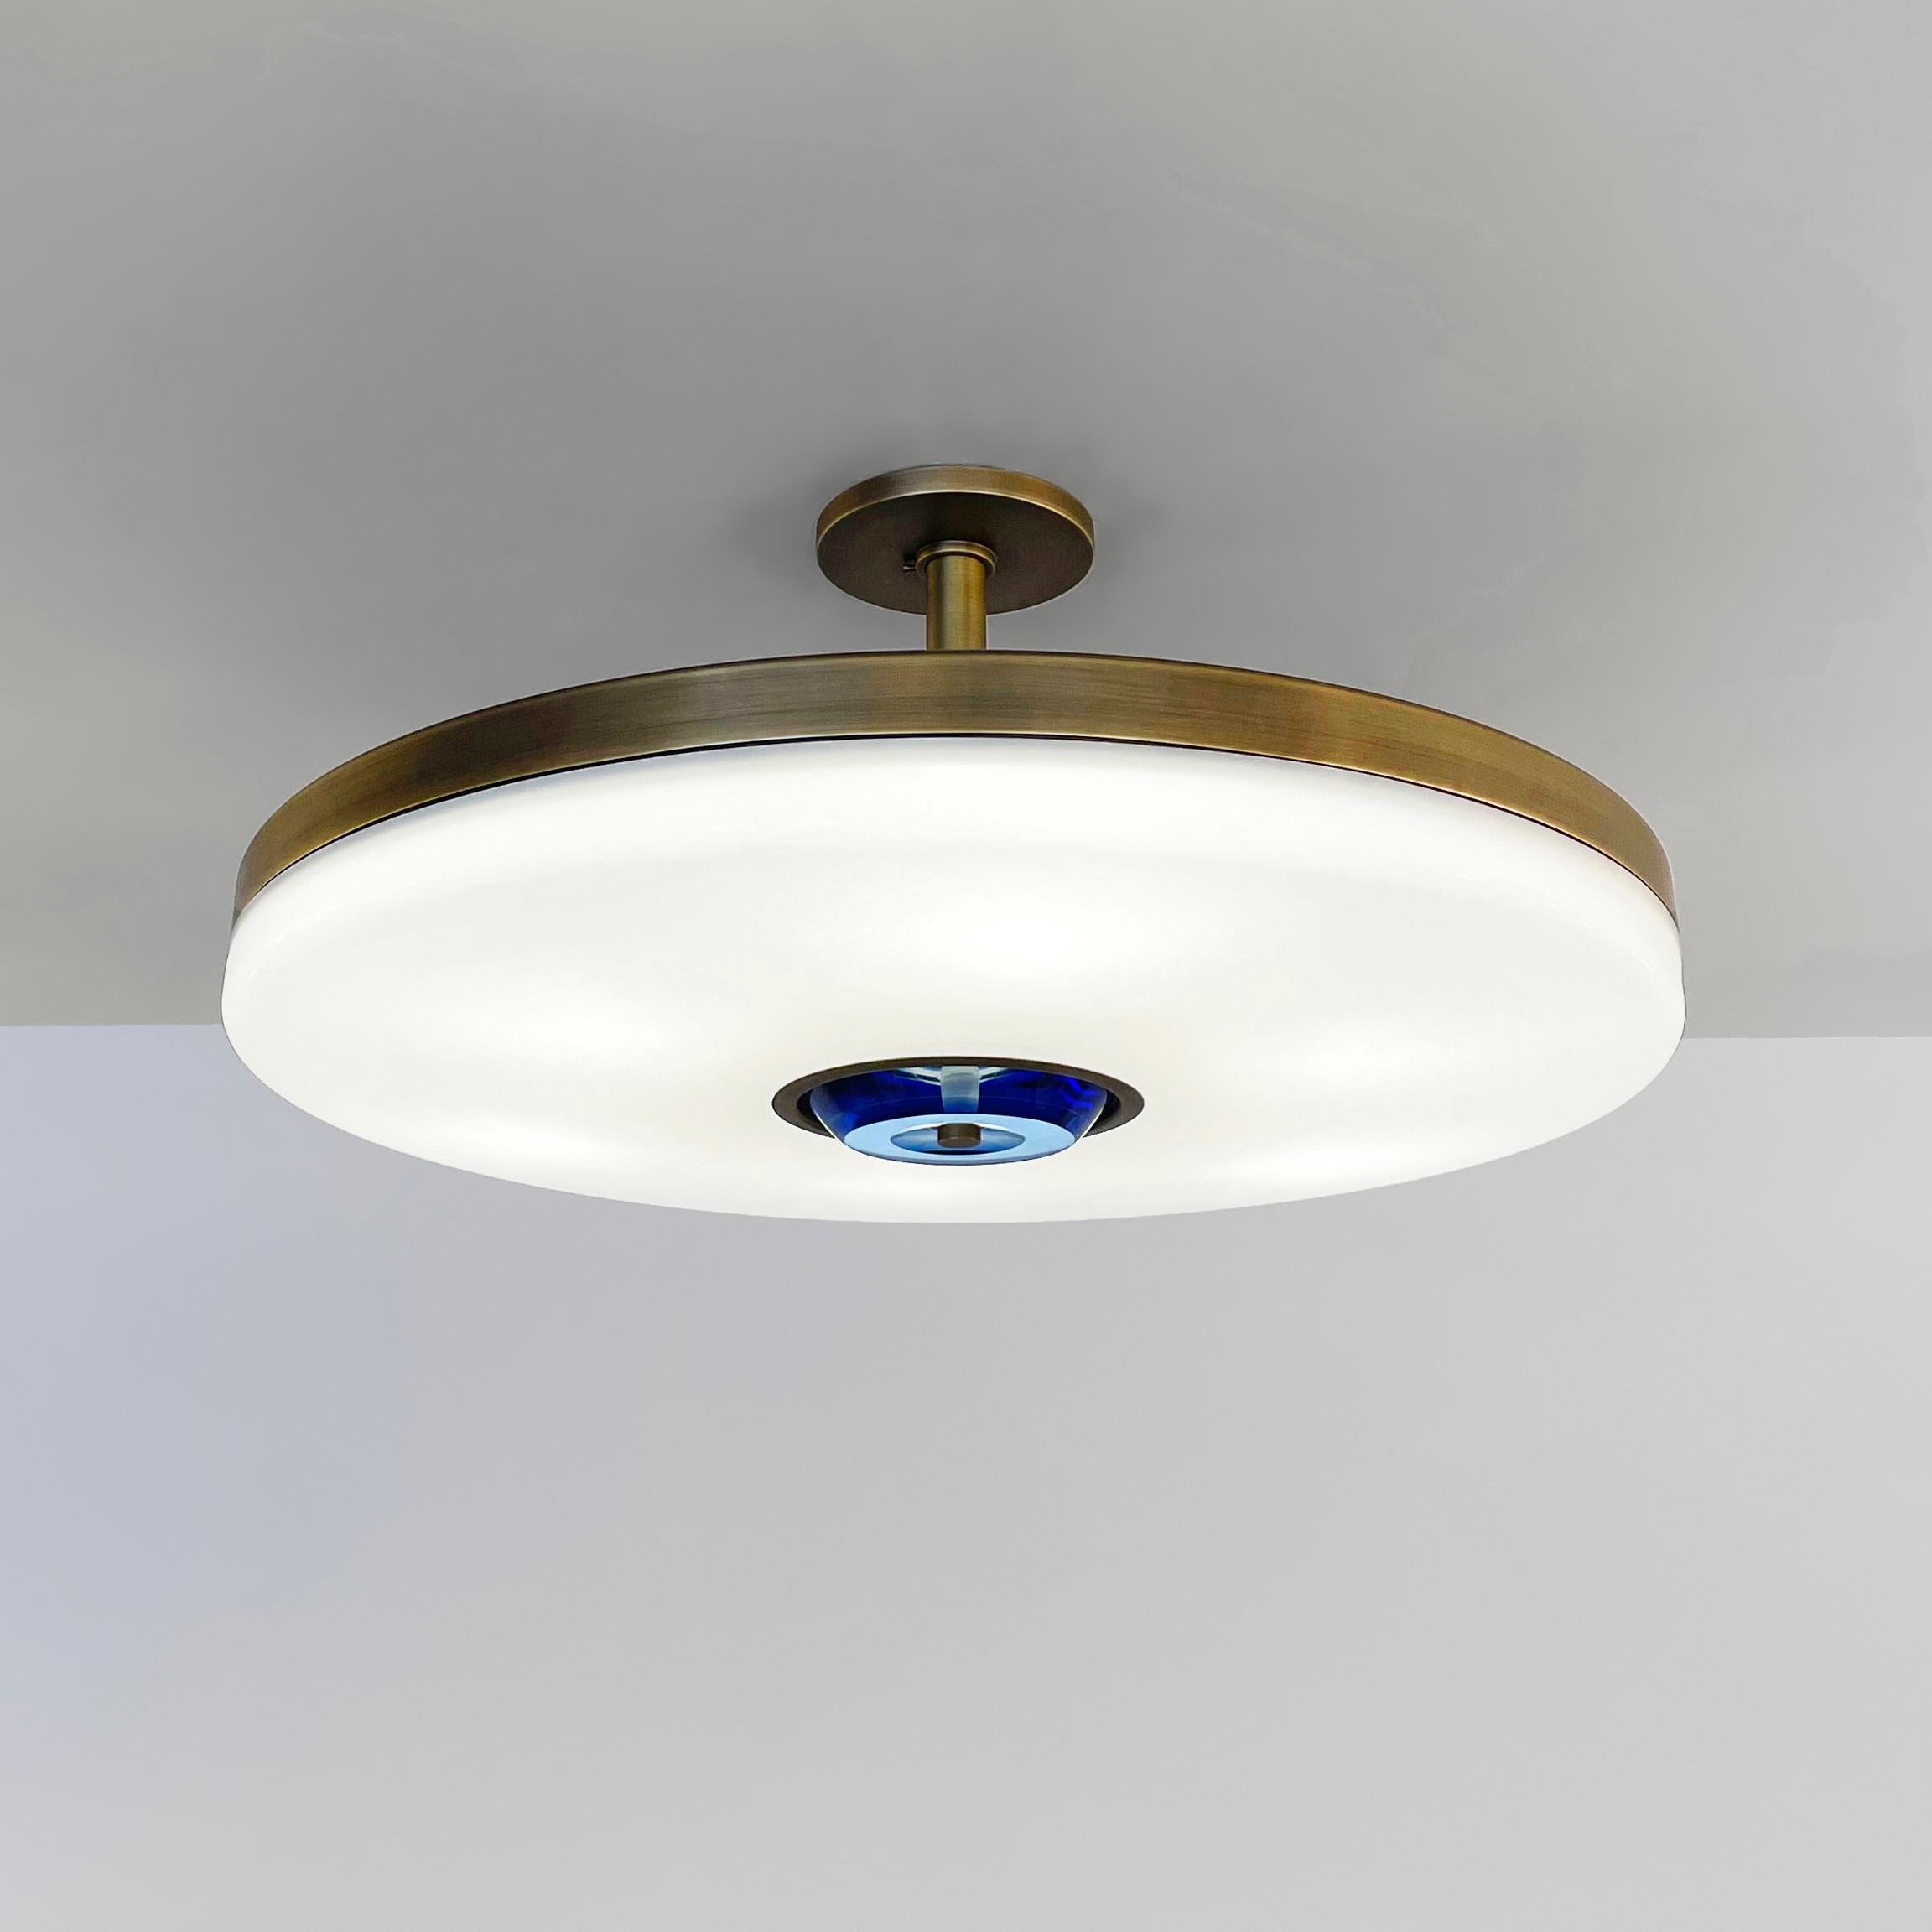 Iris Grande Ceiling Light by Gaspare Asaro - Polished Brass Finish For Sale 1